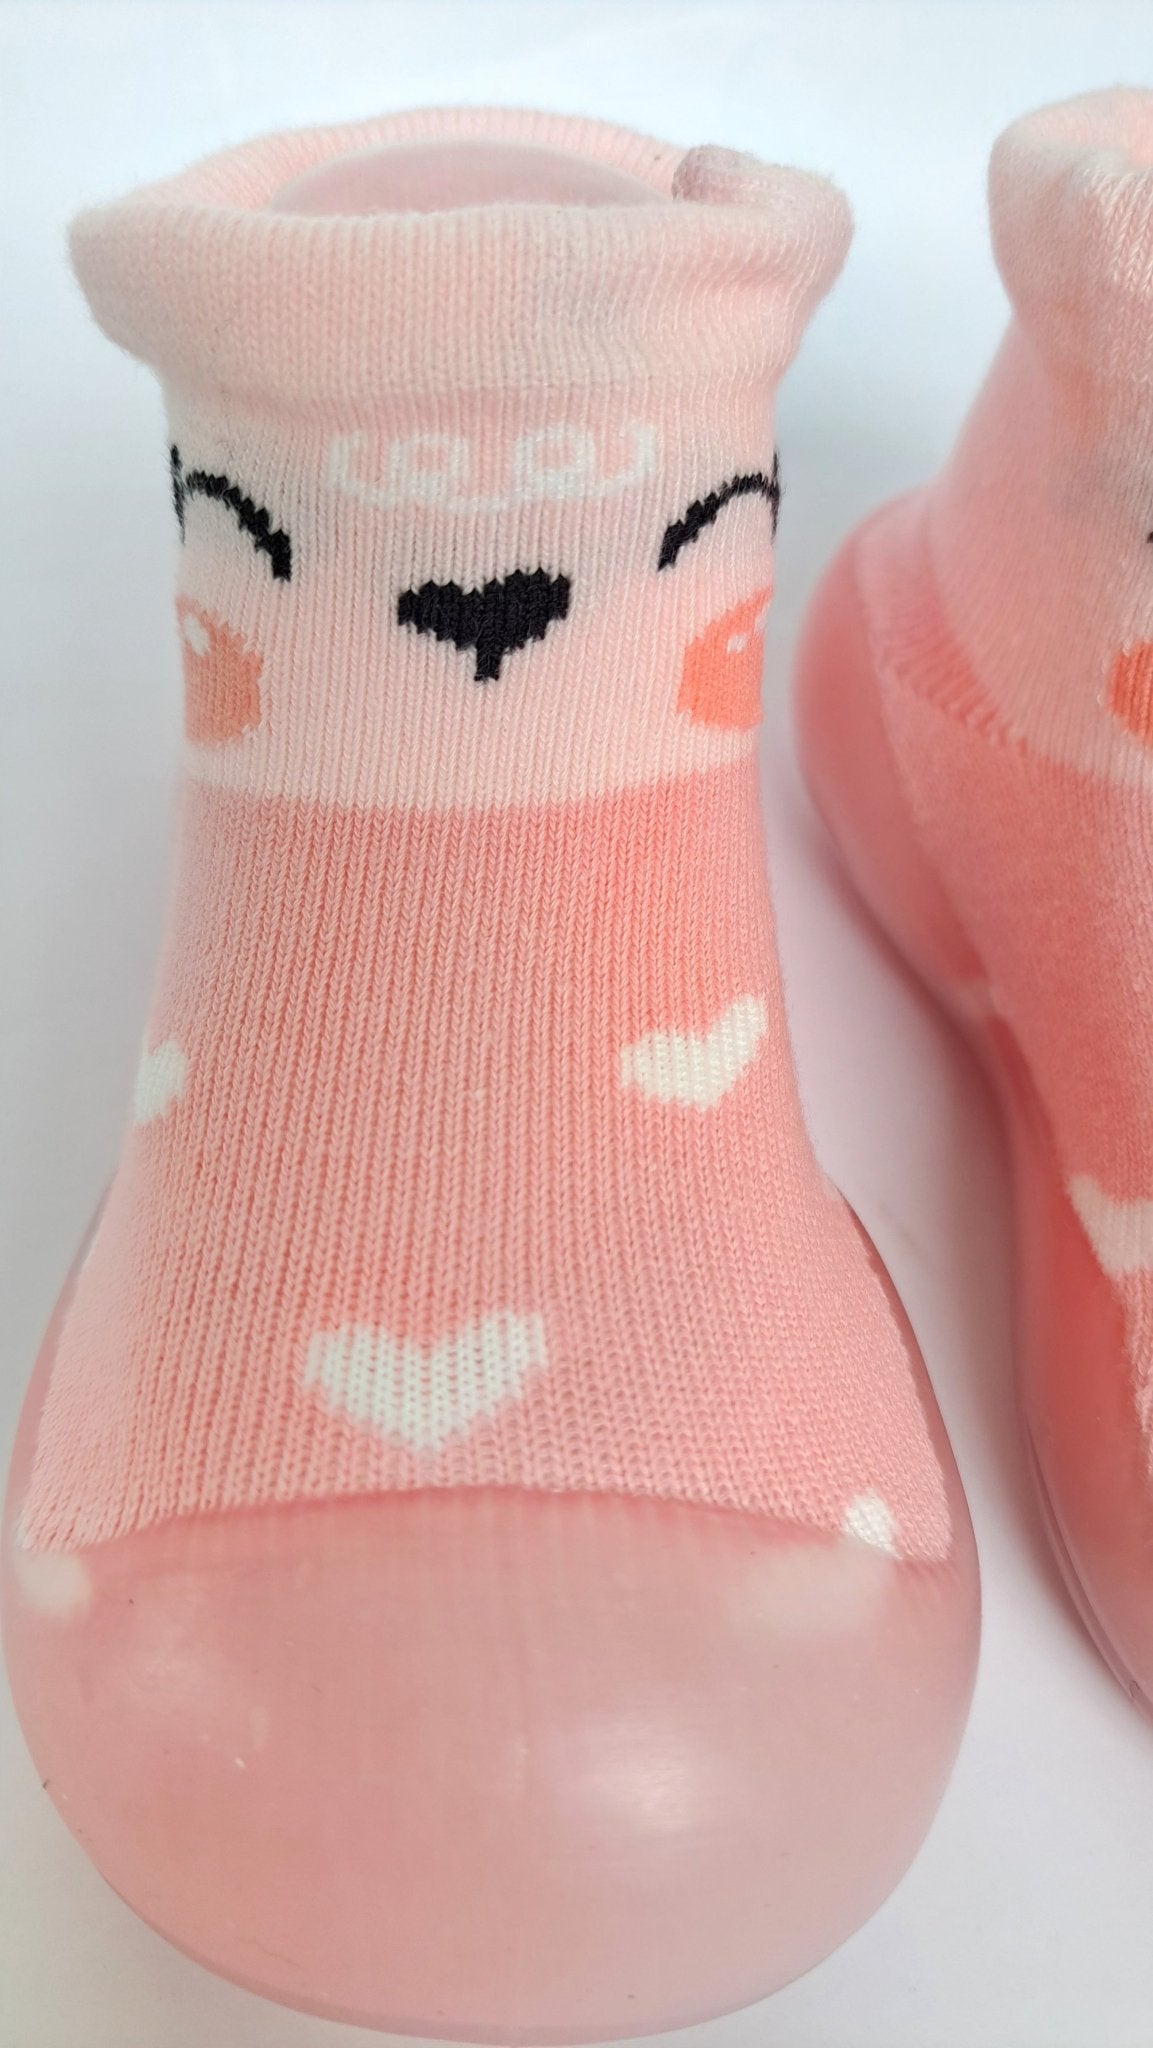 Sweetheart by Bearba- Sock Shoes for Babies & Toddlers Sizes-S,M,L,XL- Flexible Soles, Lightweight, Machine Washable-Pink - Bearba